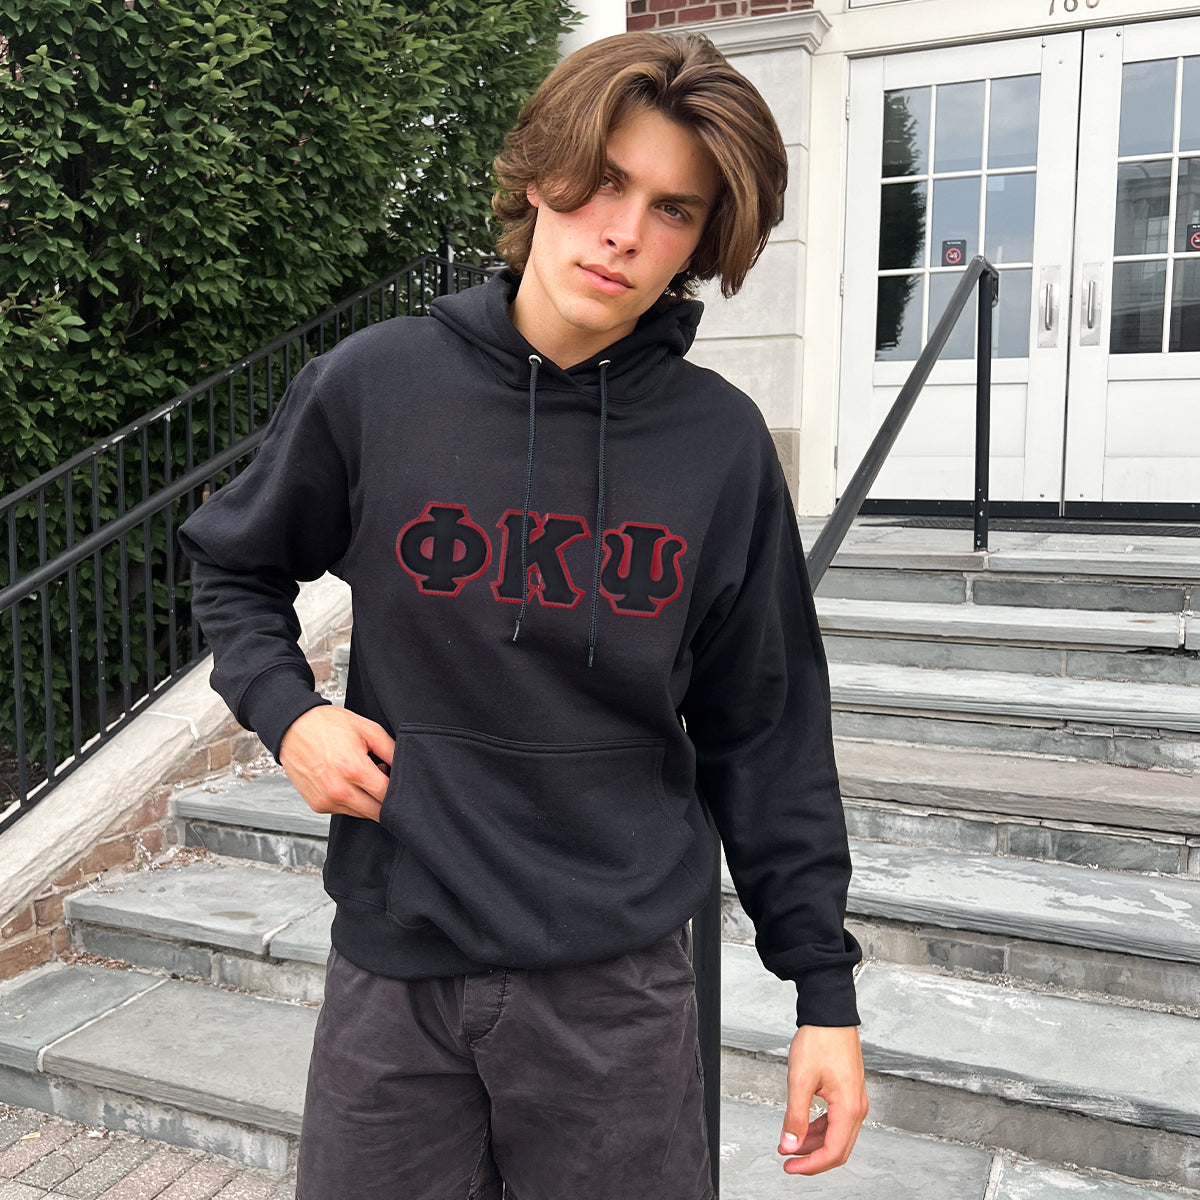 Phi Psi Black Hoodie with Black Sewn On Letters